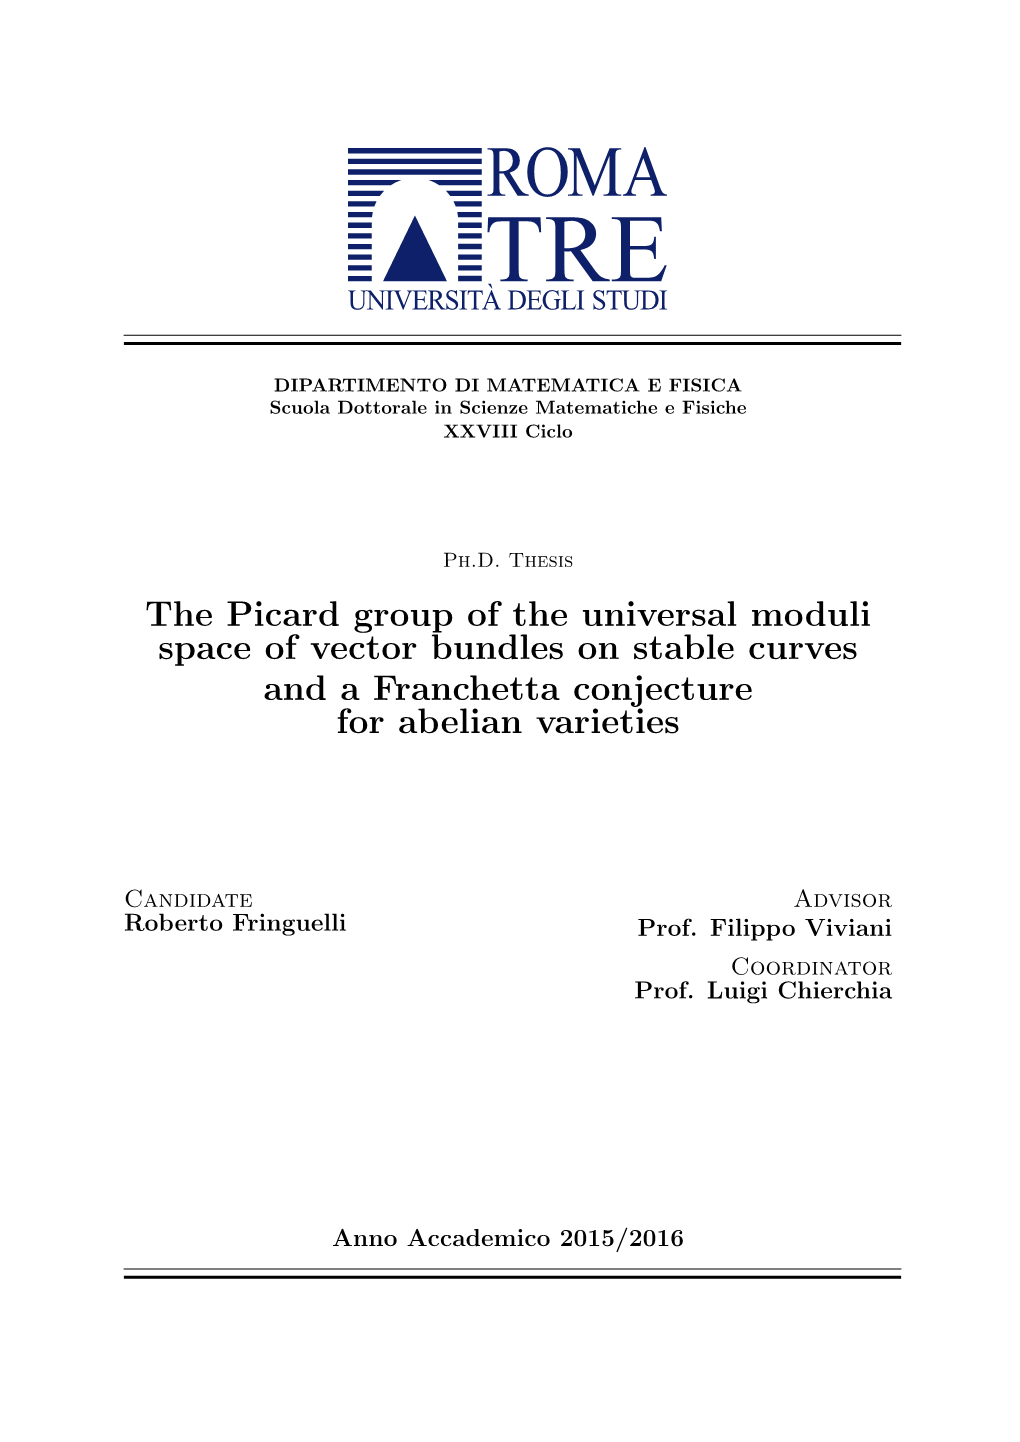 The Picard Group of the Universal Moduli Space of Vector Bundles on Stable Curves and a Franchetta Conjecture for Abelian Varieties